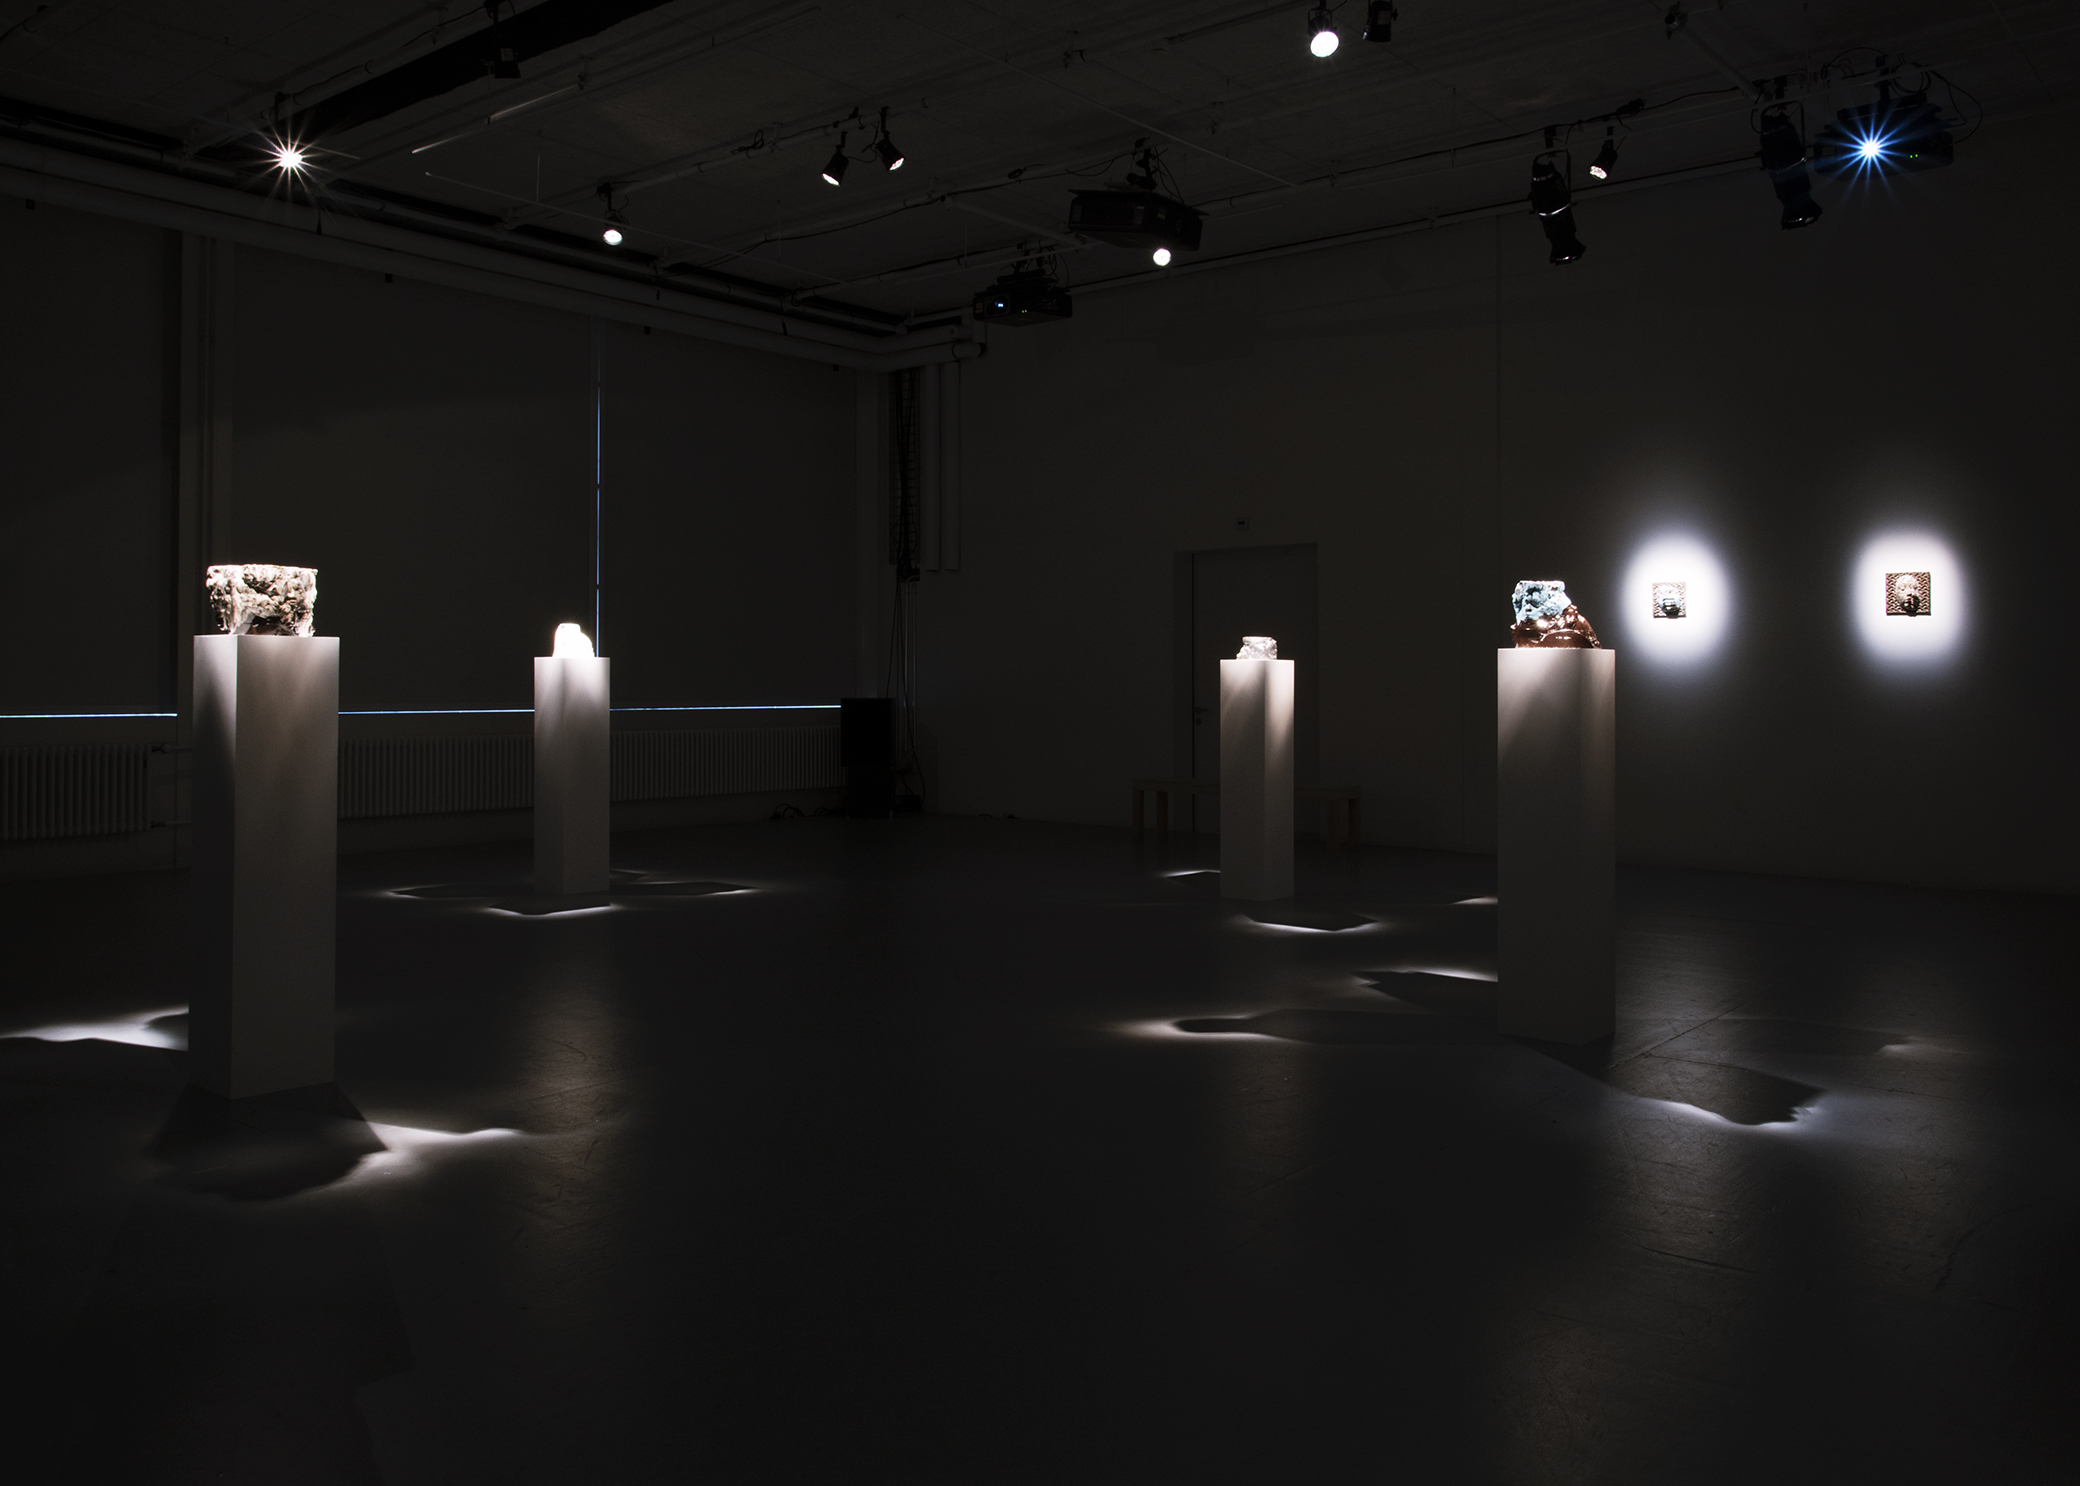 installation photo of ceramic pieces on plinths in a dark space, where the pieces are illuminated by spotlights